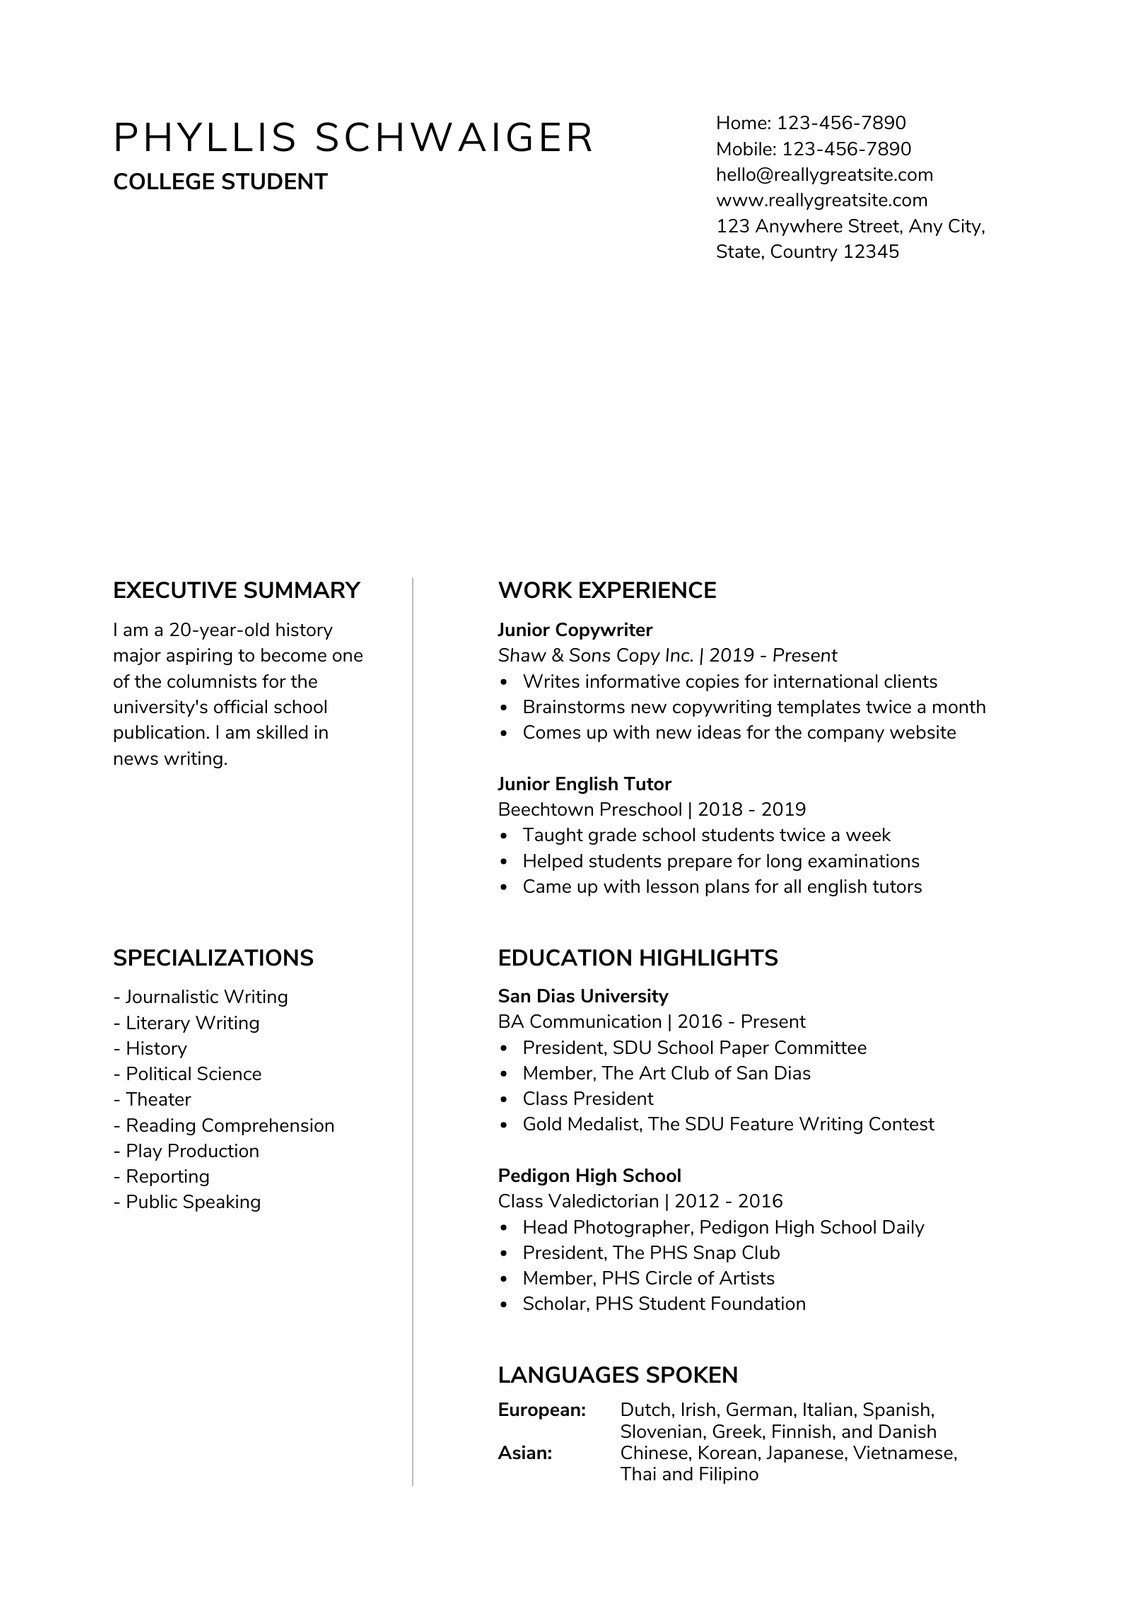 resume: The Google Strategy